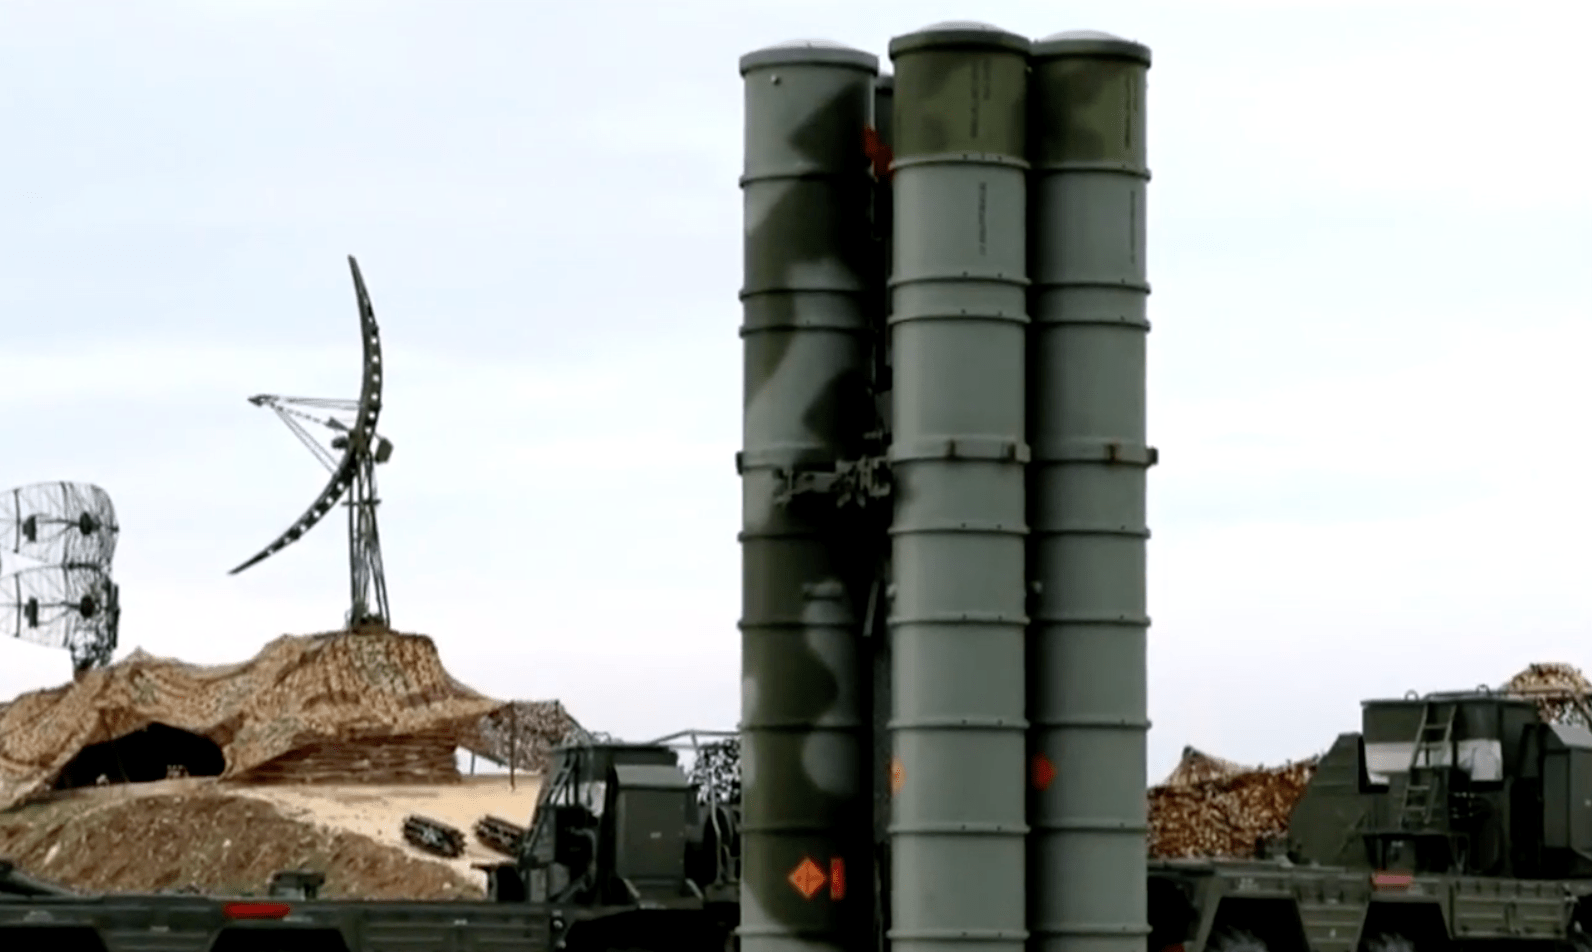 Repercussions of Turkey Receiving the S-400